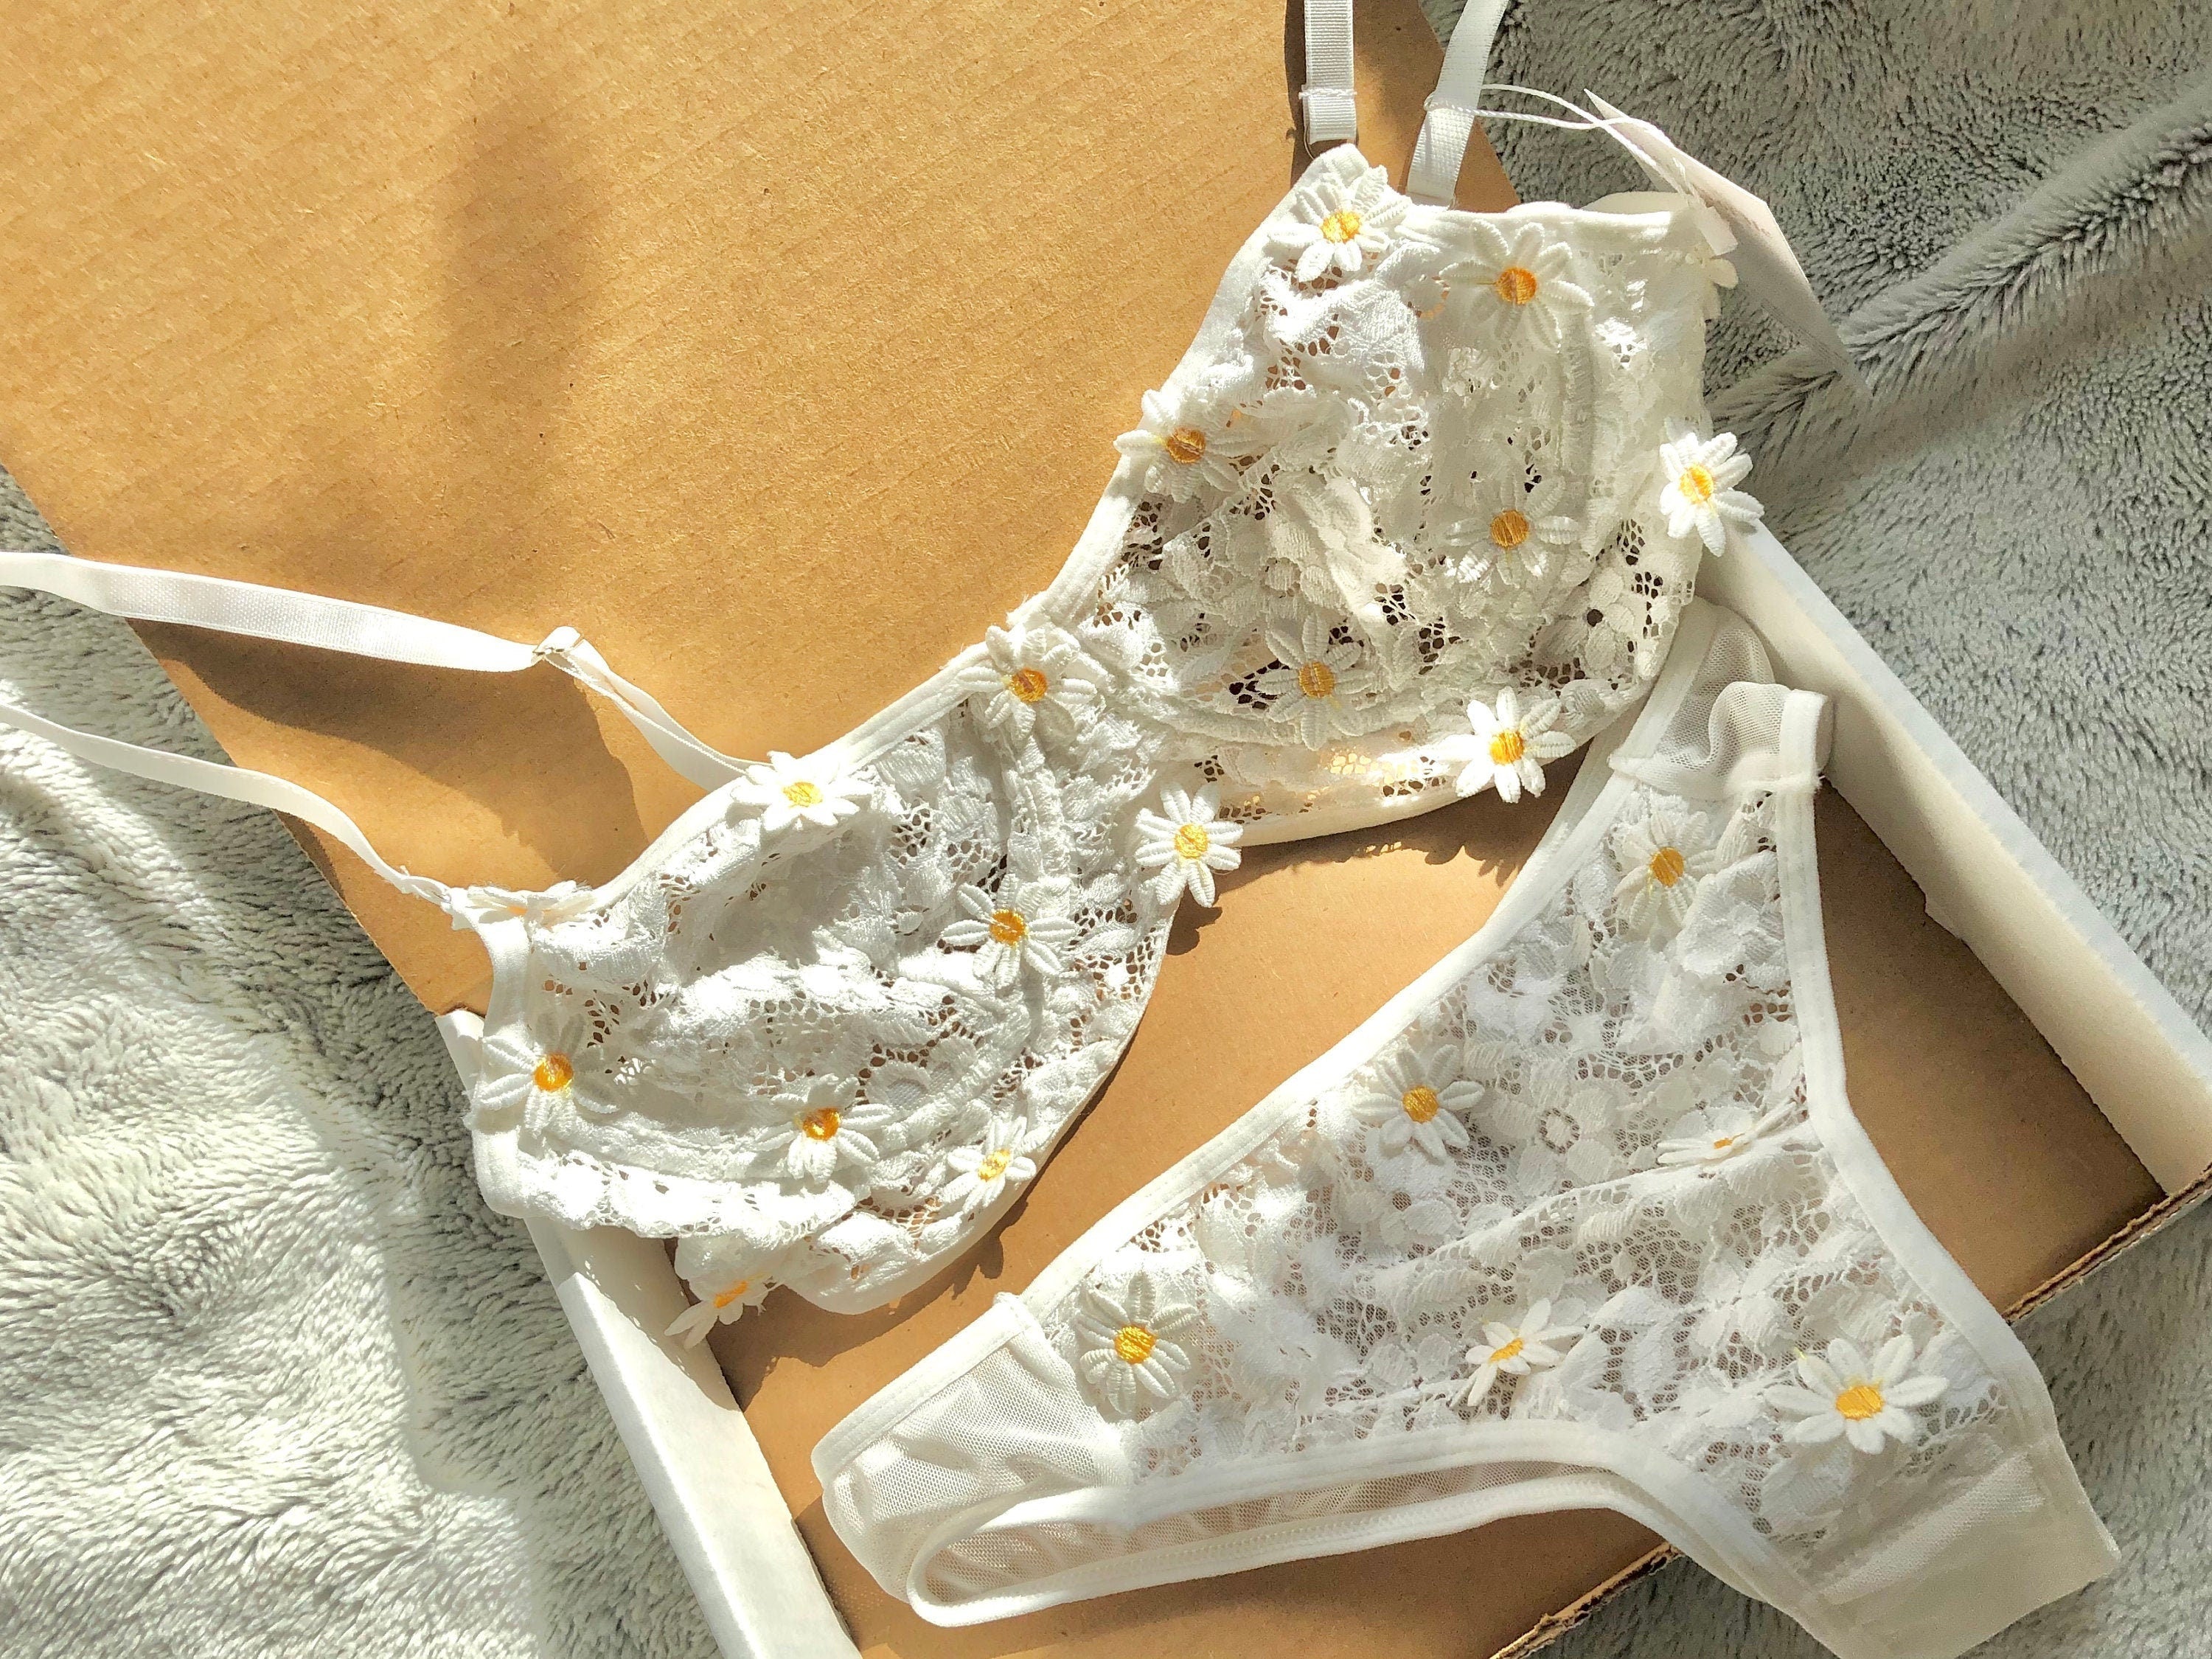 Shop Blossom Lace Bra and Pantie